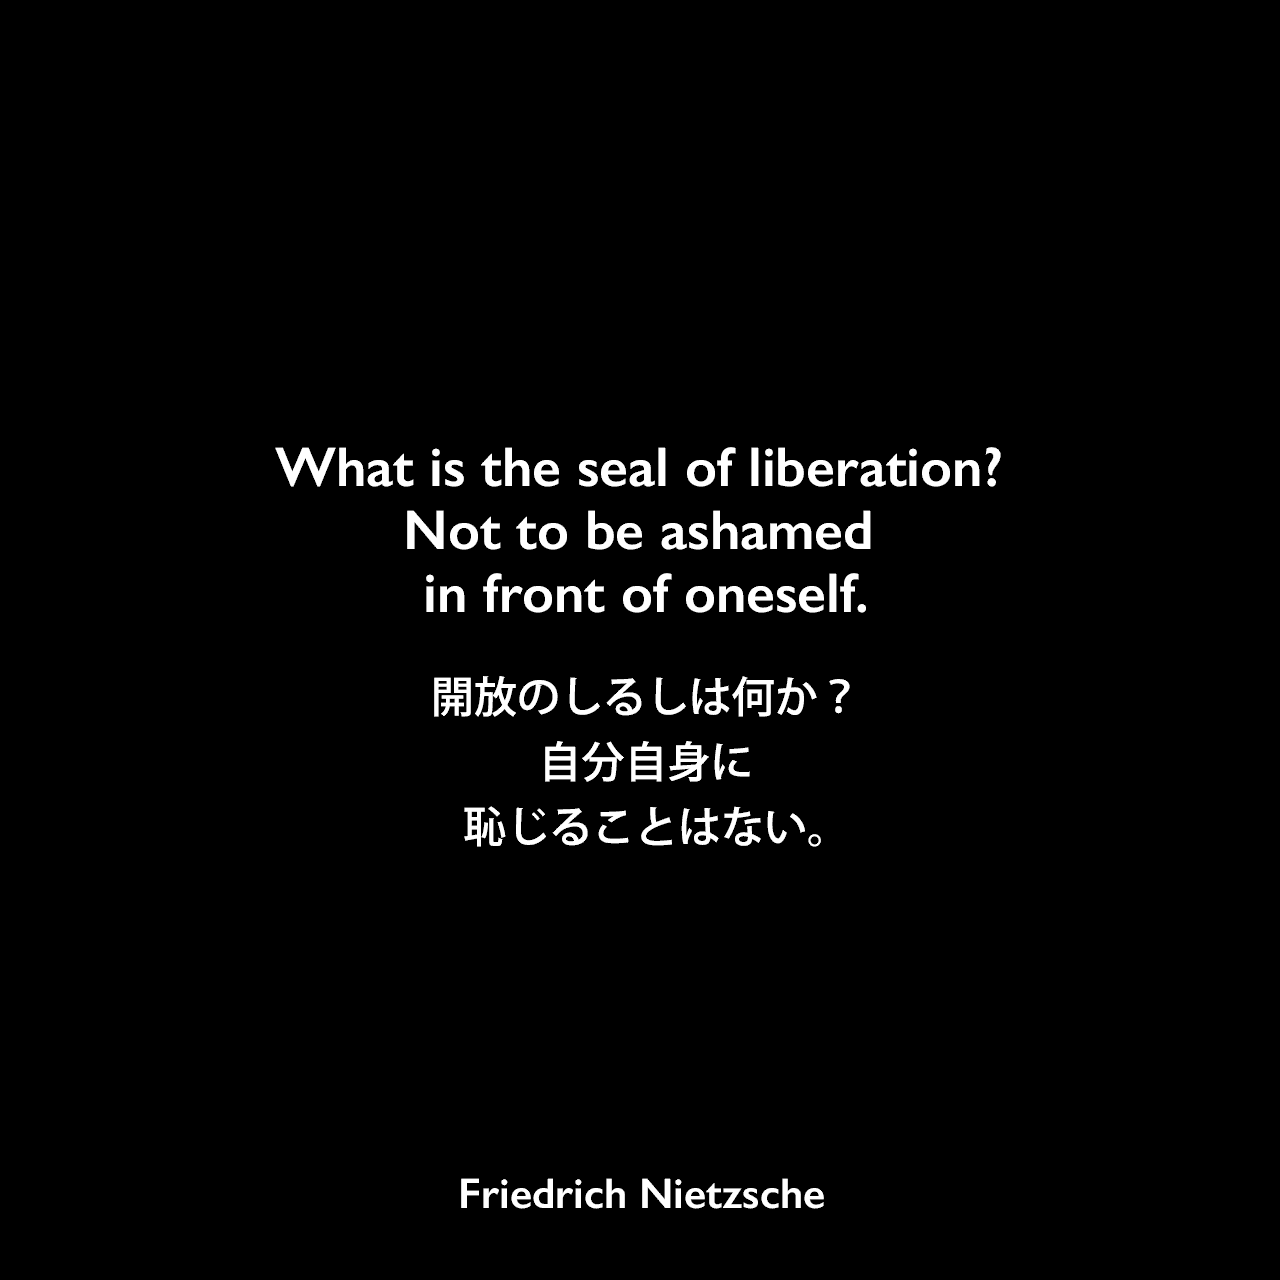 What is the seal of liberation? Not to be ashamed in front of oneself.開放のしるしは何か？　–　自分自身に恥じることはない。Friedrich Nietzsche